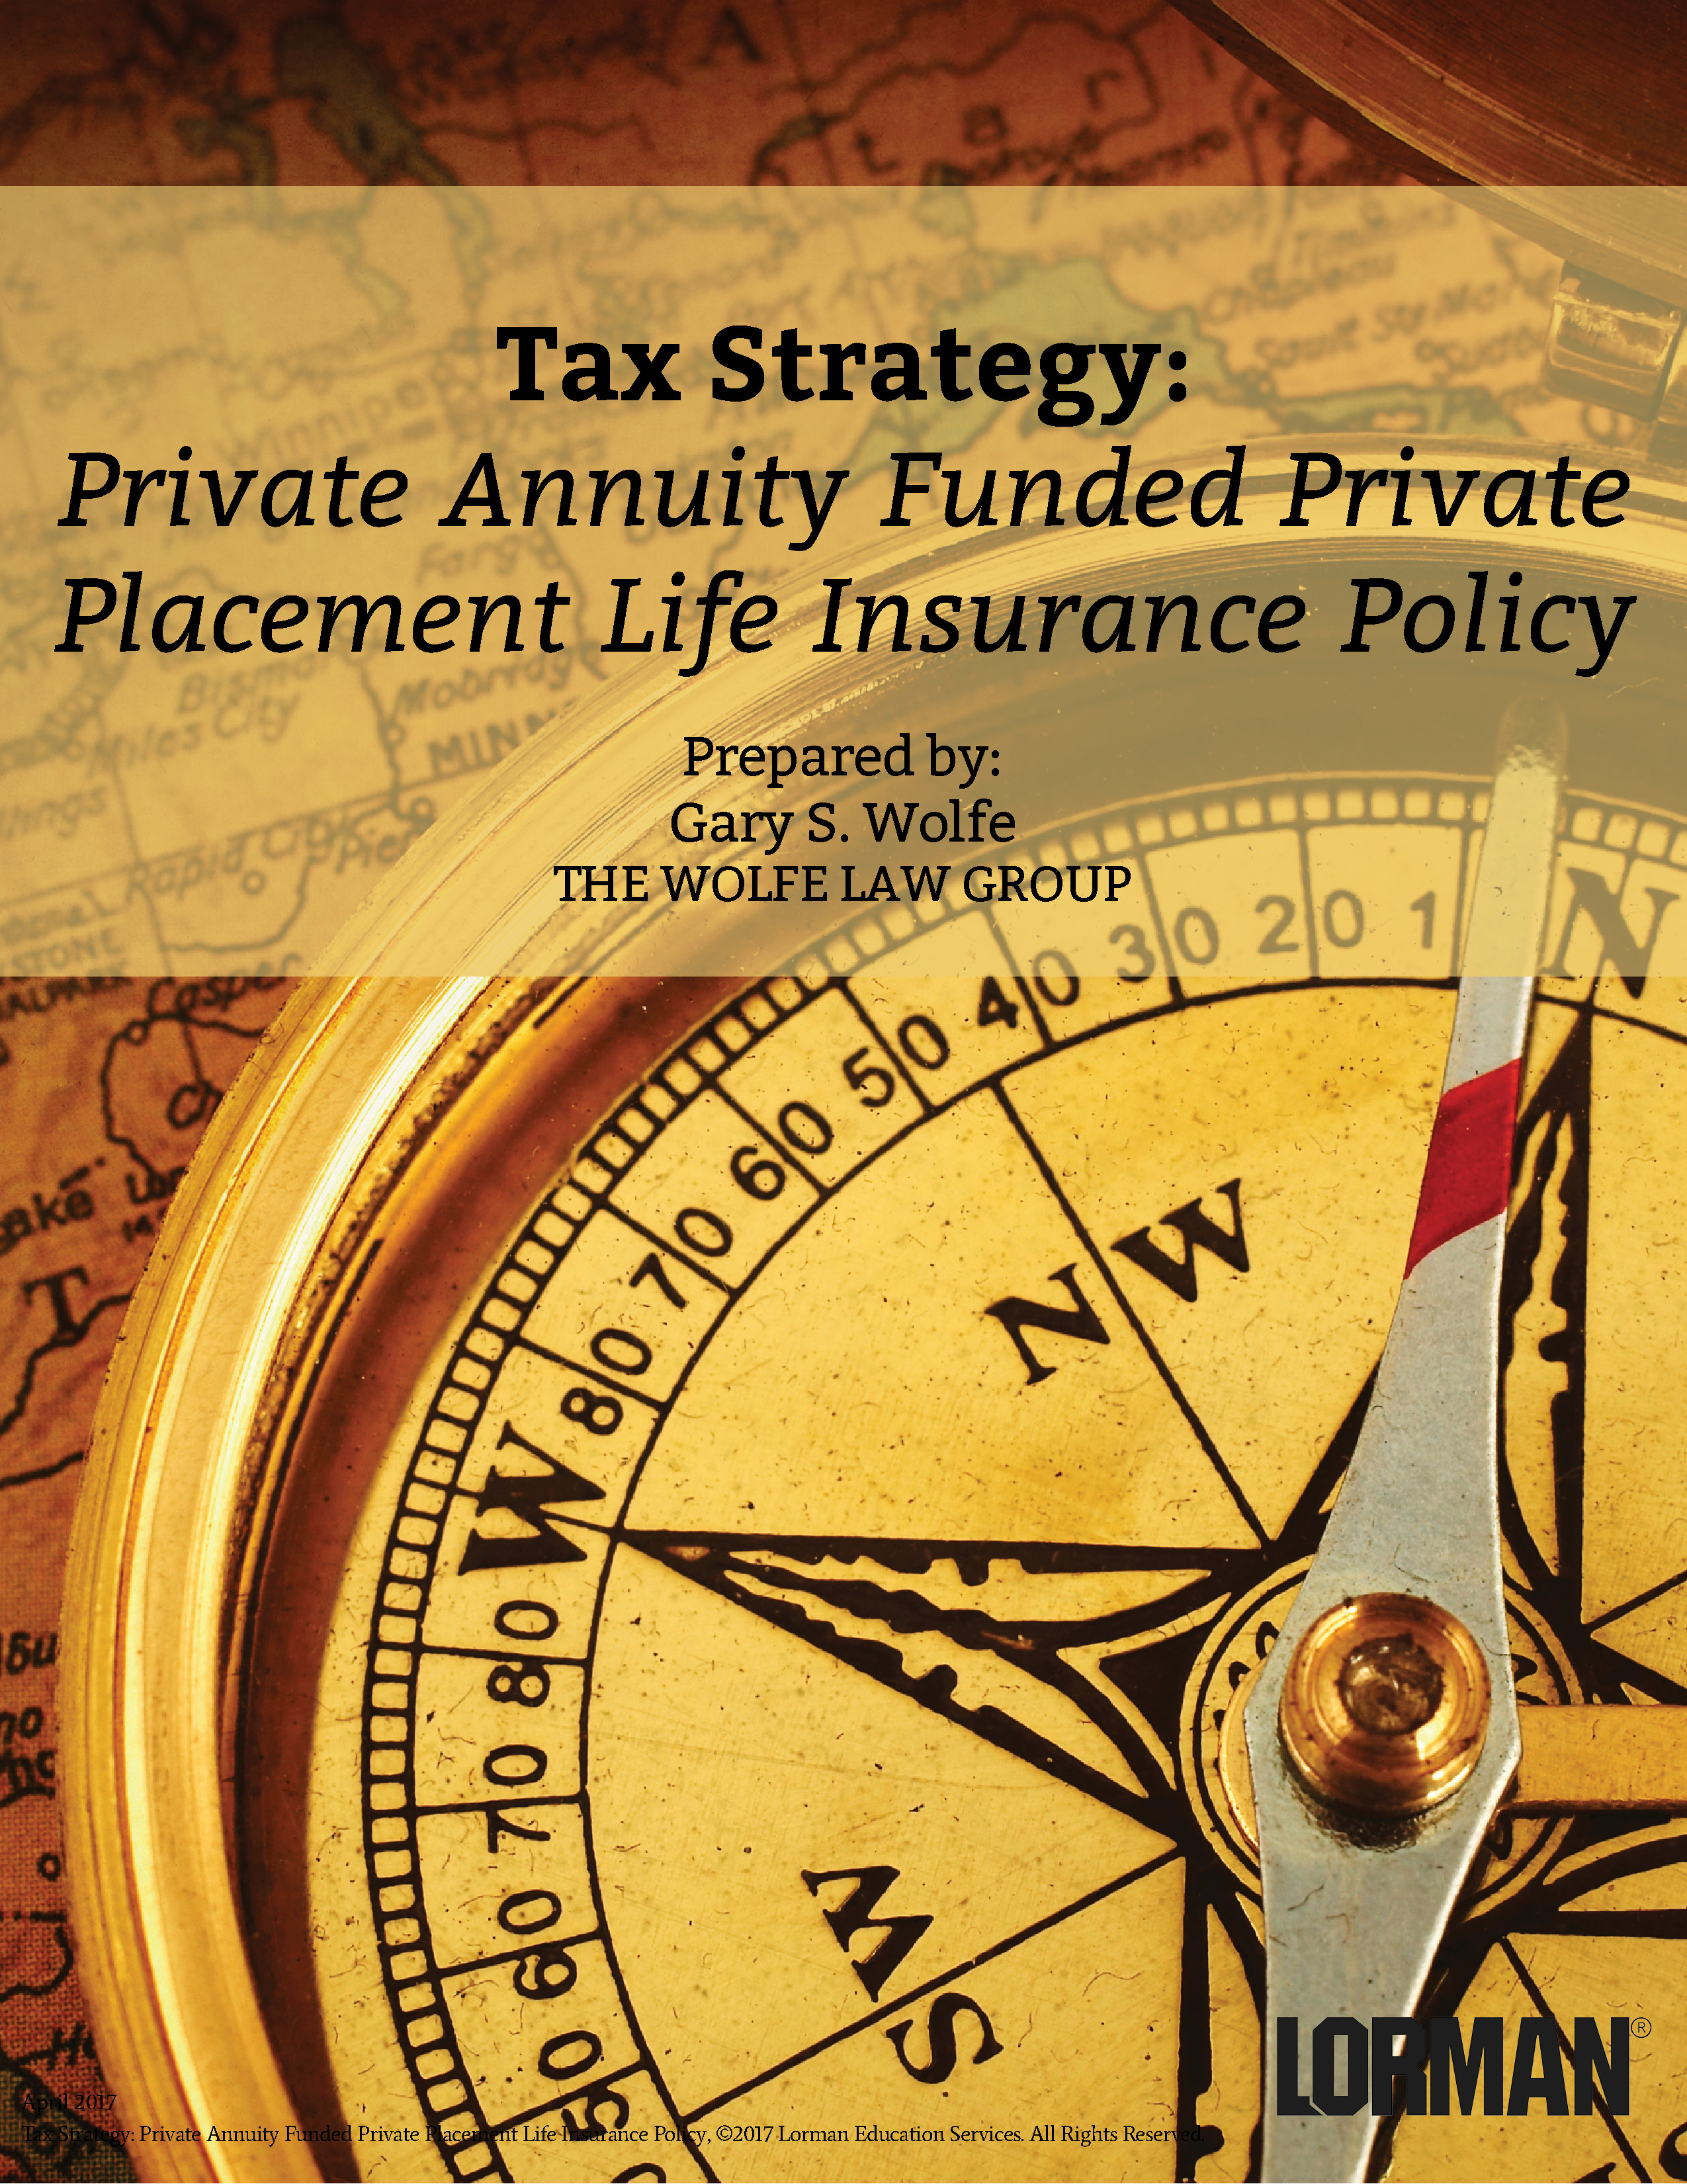 Tax Strategy: Private Annuity Funded Private Placement Life Insurance Policy